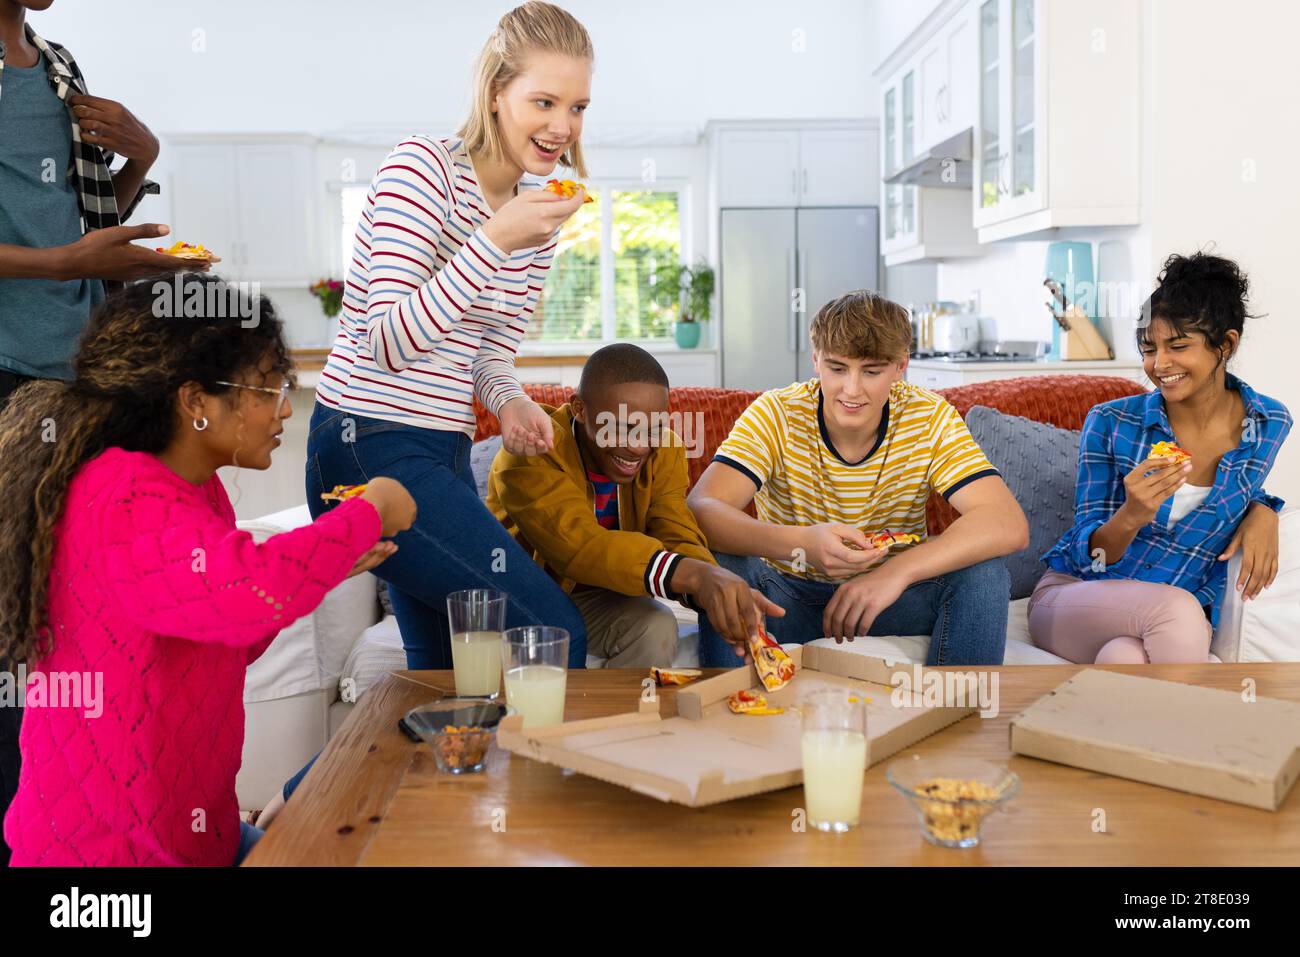 Happy diverse group of teenage friends sitting on couch and eating pizza Stock Photo